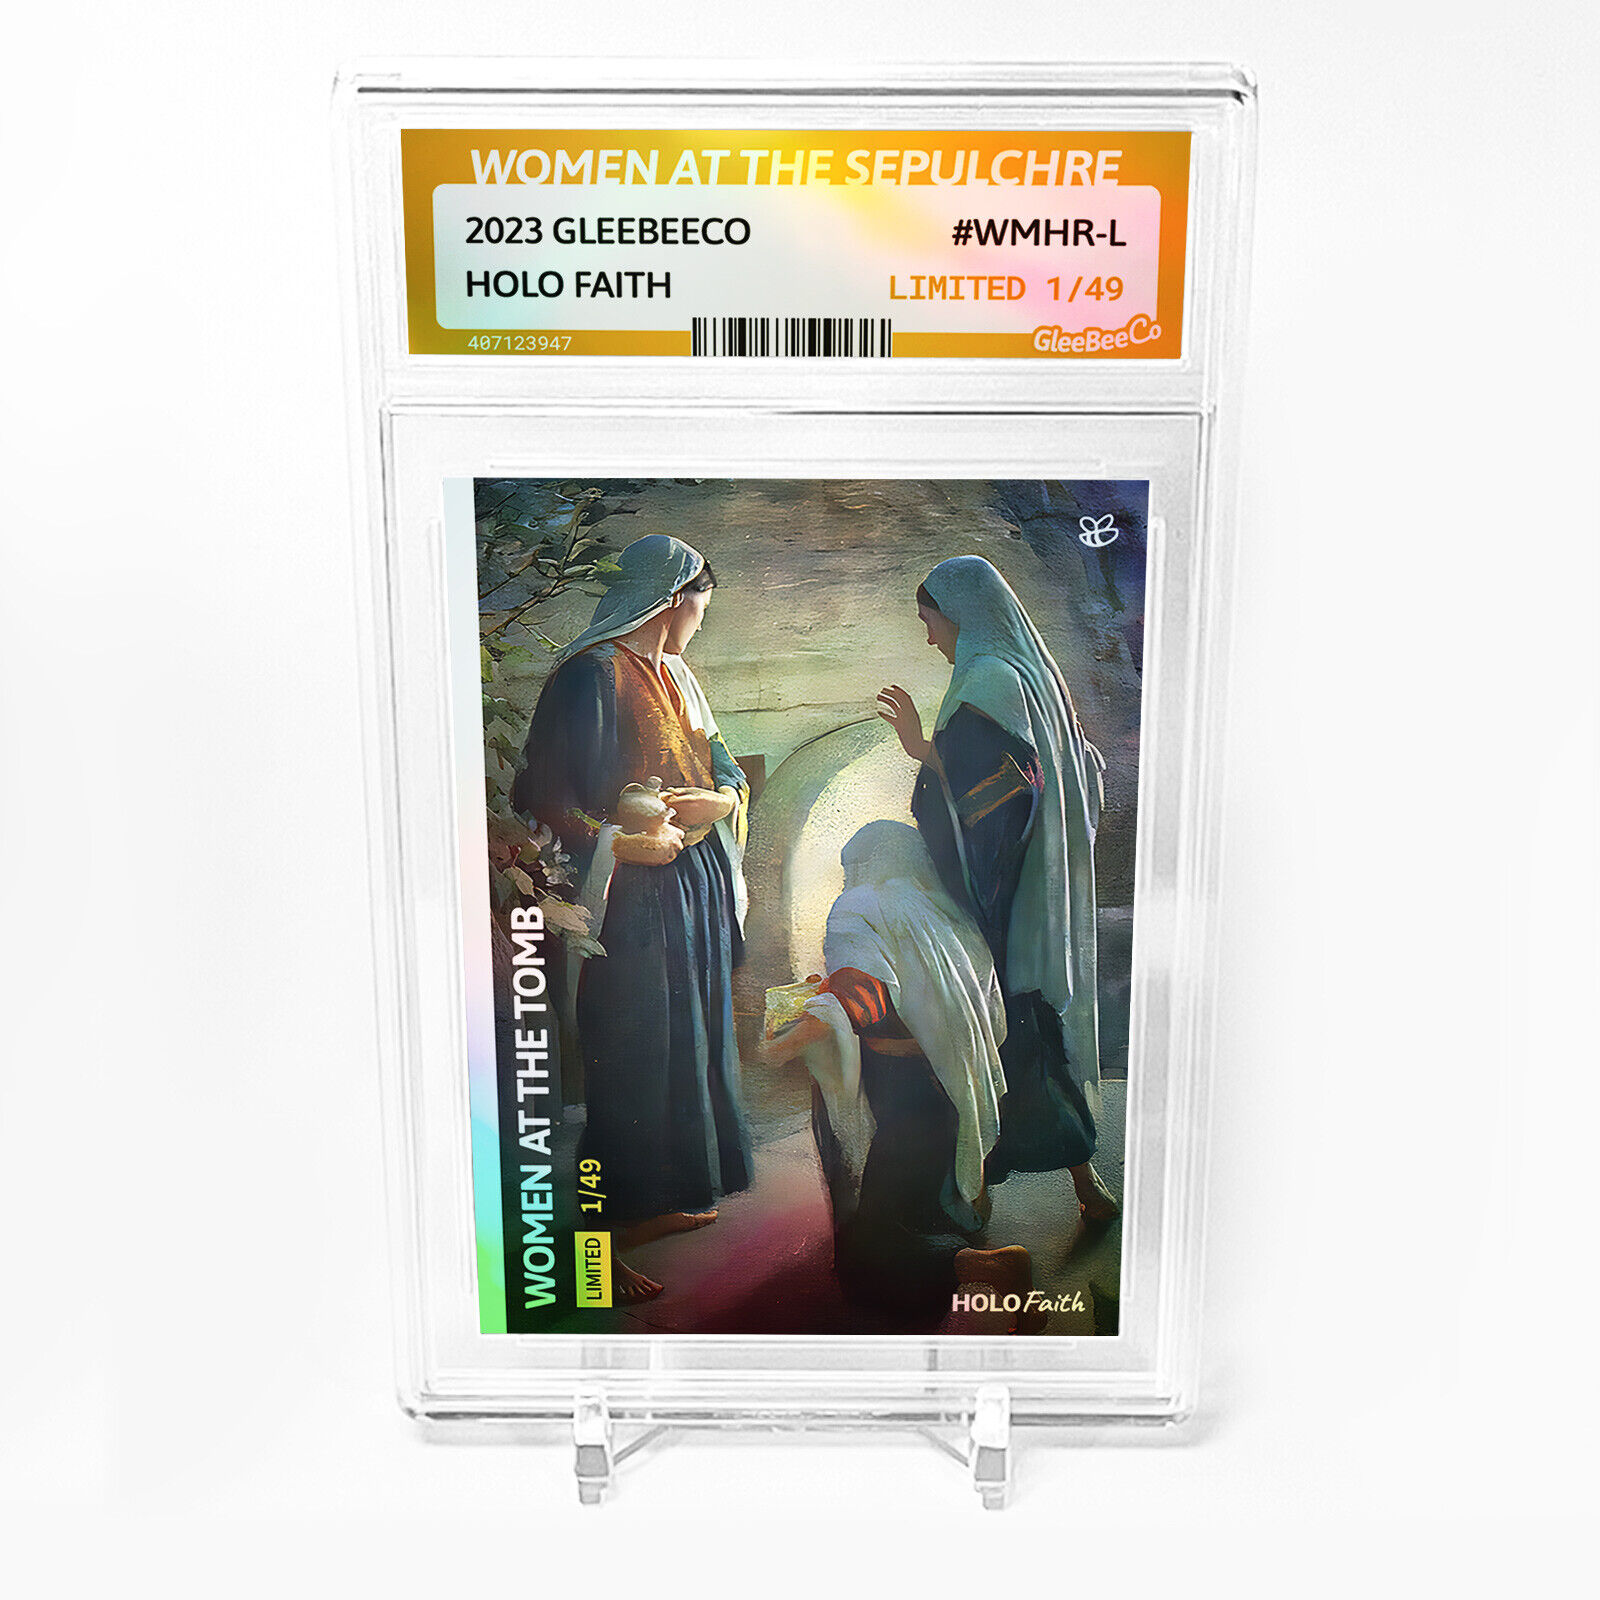 WOMEN AT THE SEPULCHRE Card 2023 GleeBeeCo Holo Faith Slabbed #WMHR-L Only /49